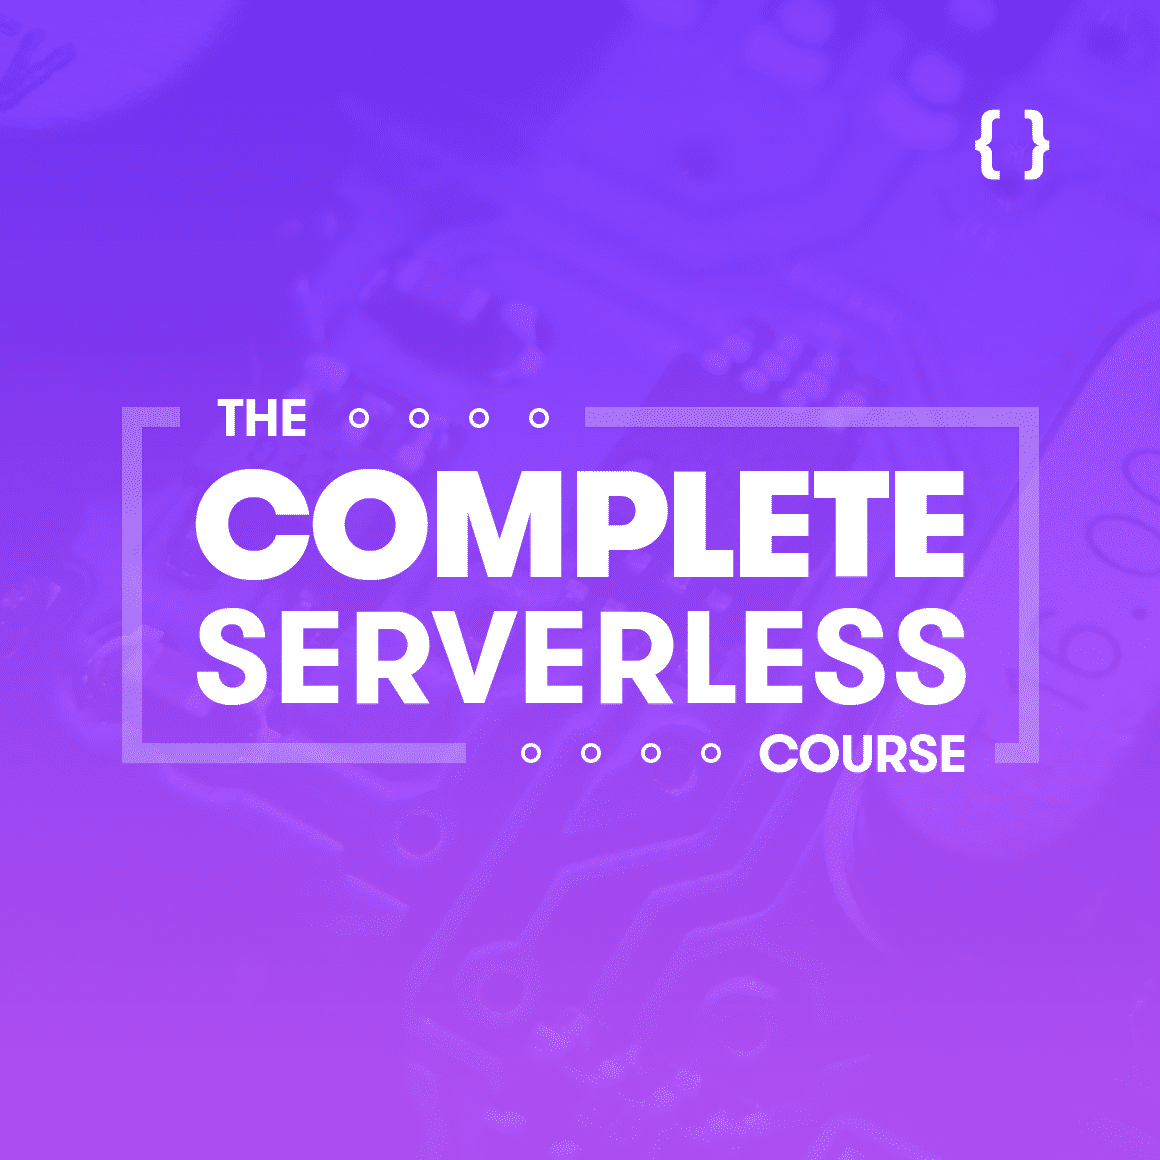 complete-serverless-course-square-png.png